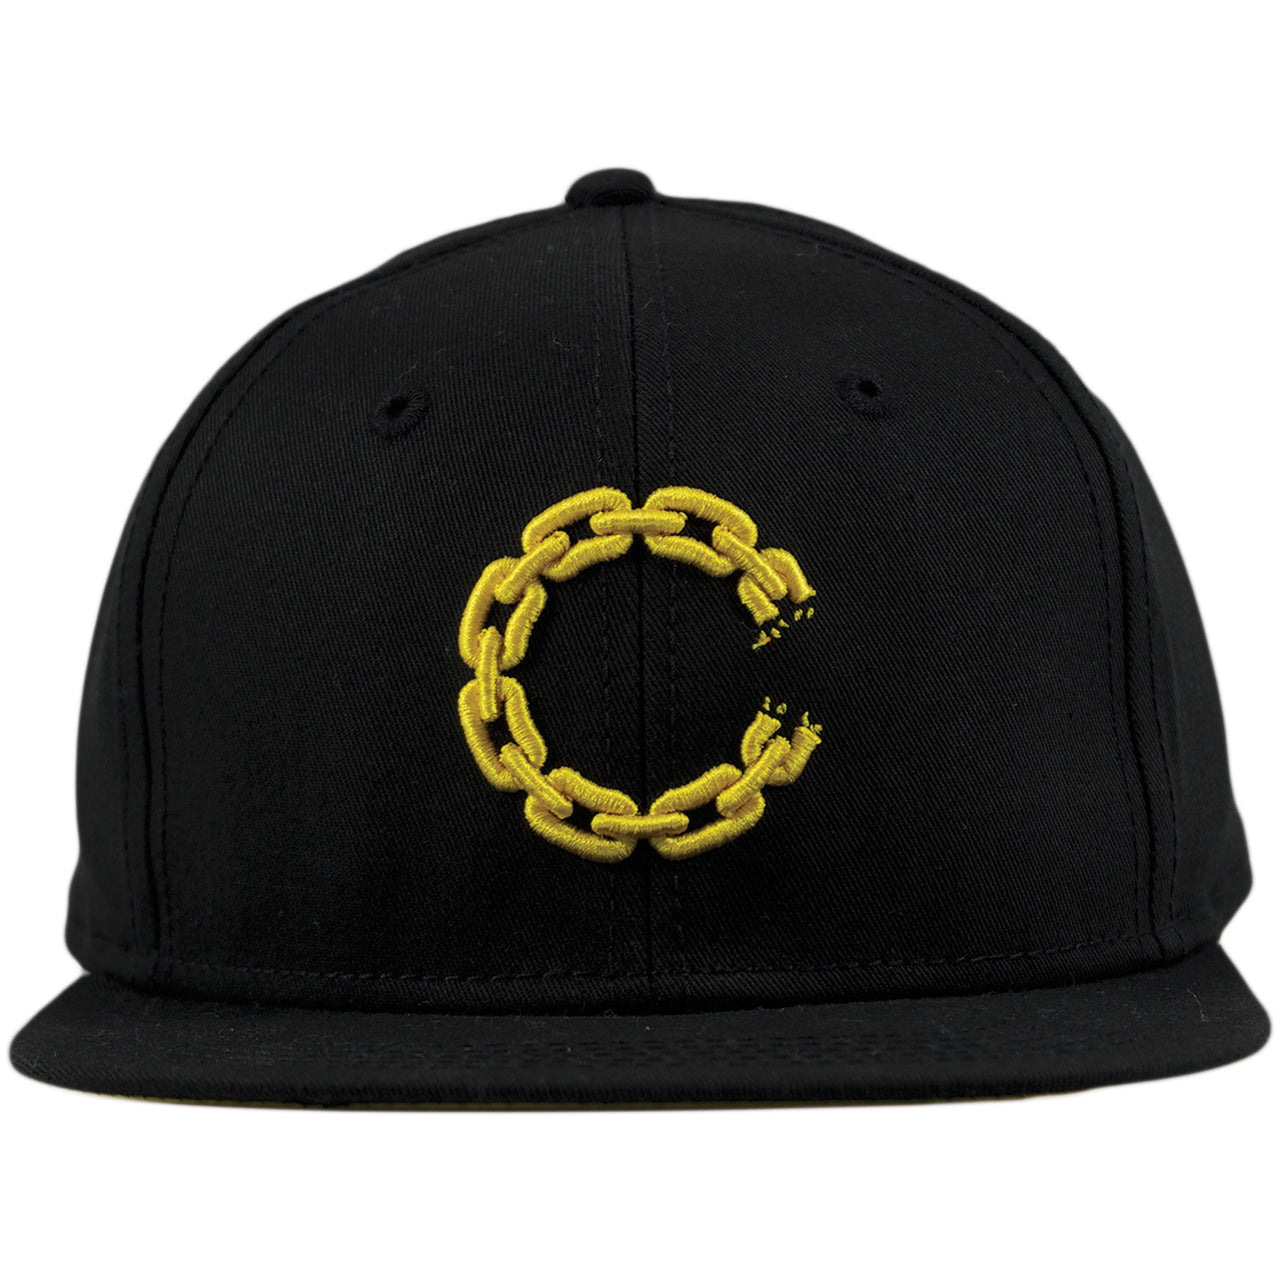 Crooks and Castles Black and Gold Woven Chain Snapback Hat